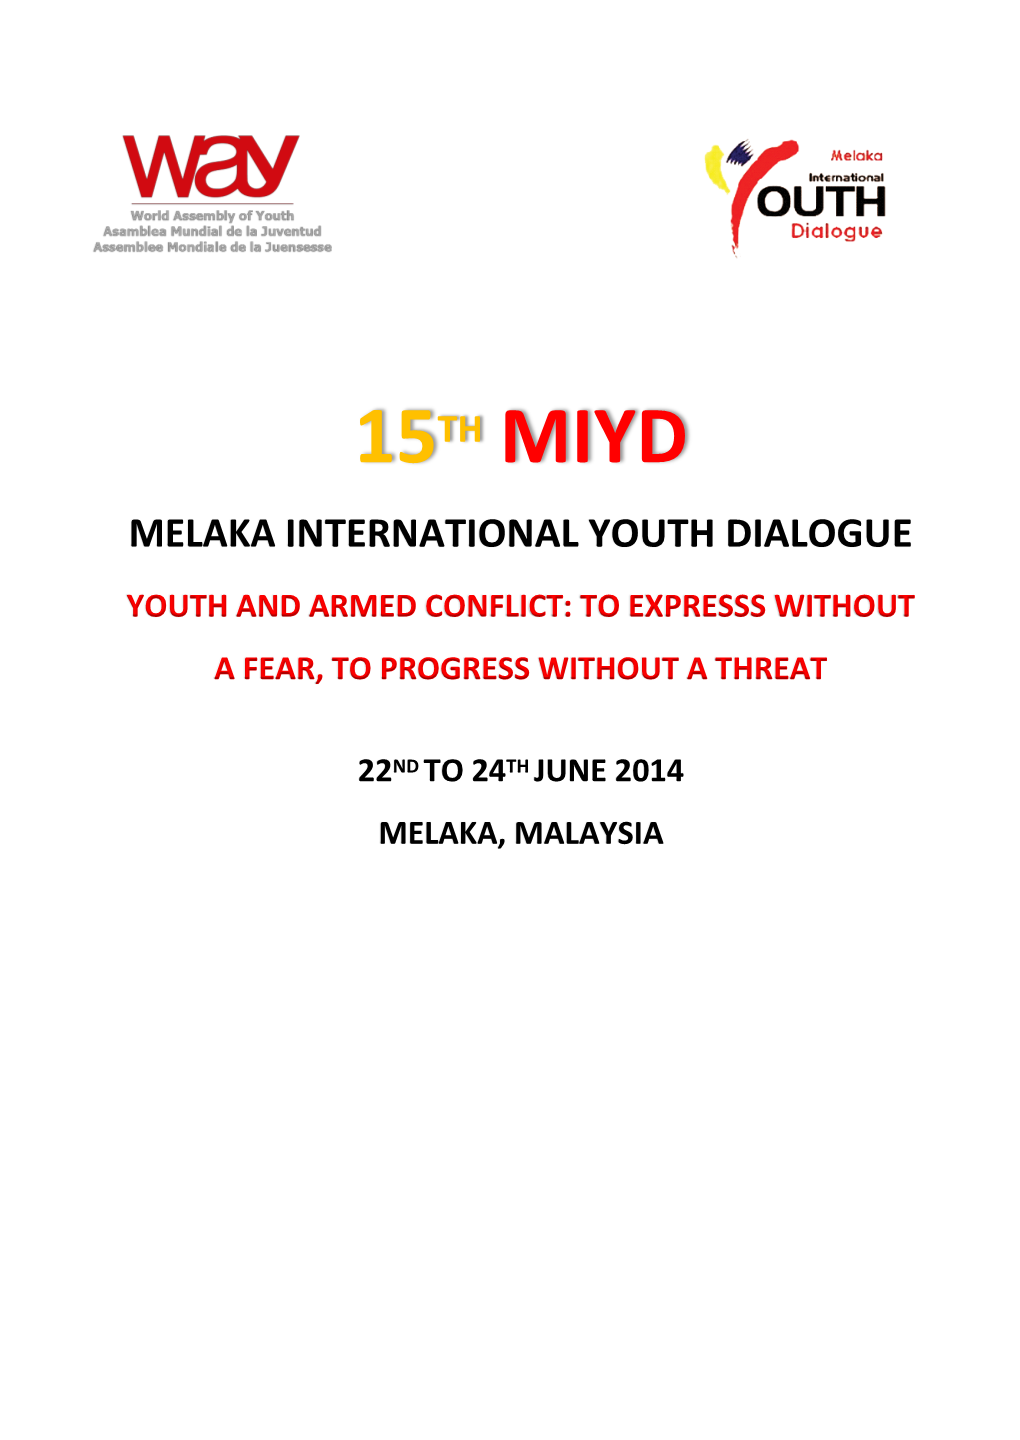 15Th Miyd International Youth Dialogue Youth and Armed Conflict: to Expresss Without a Fear, to Progress Without a Threat